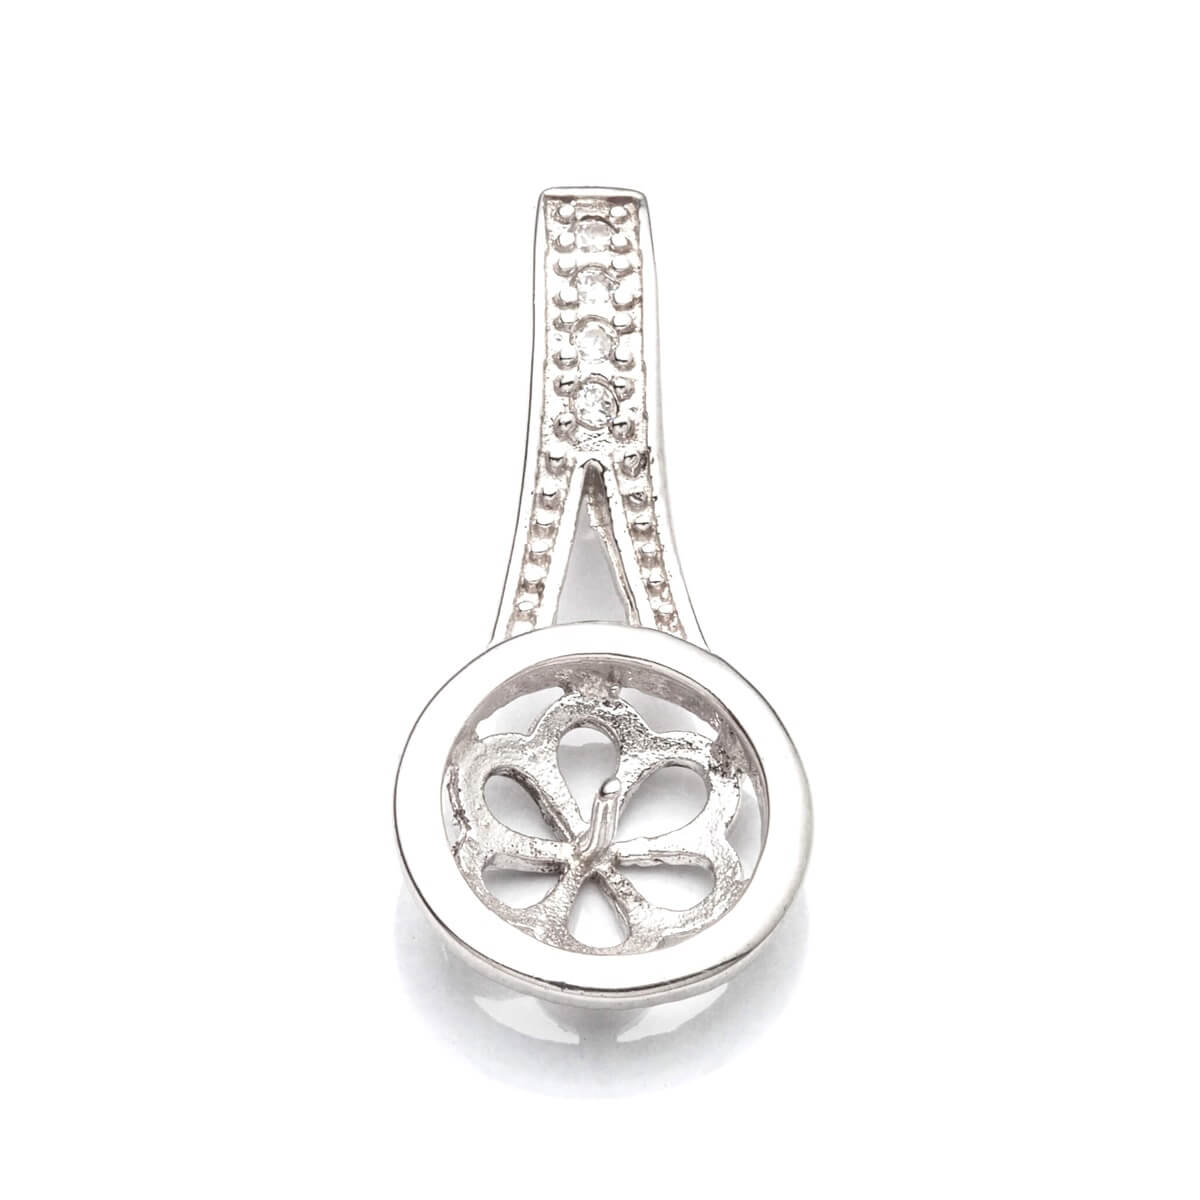 Round Pendant with Cubic Zirconia Inlays and Cup and Peg Mounting in Sterling Silver 8mm